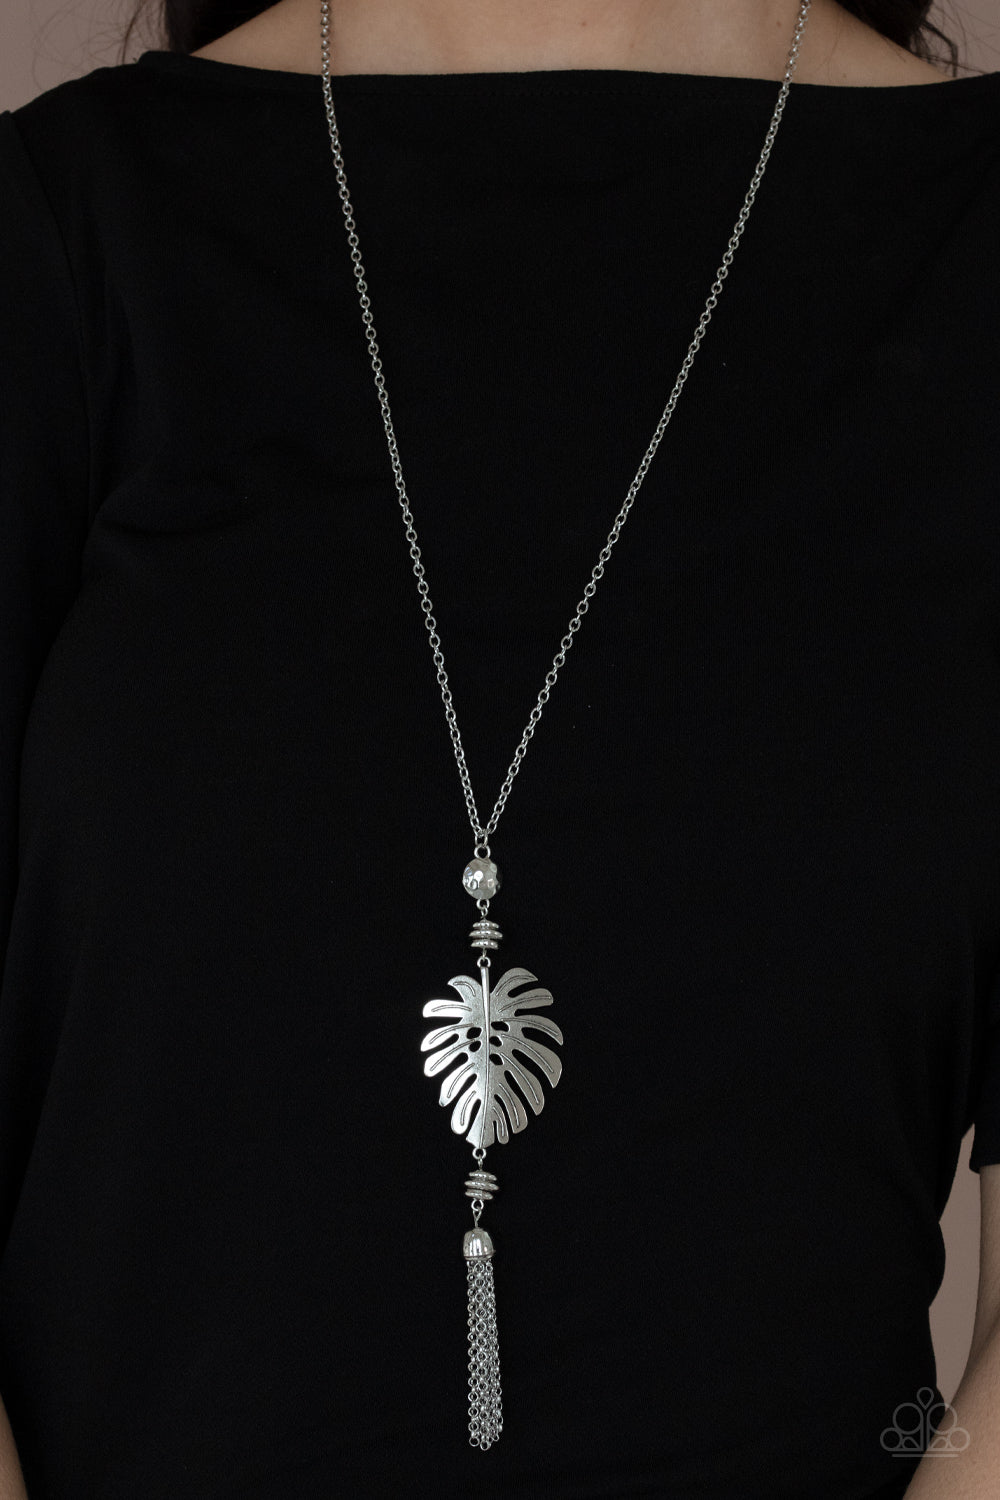 Palm Promenade Silver Necklace - Paparazzi Accessories  Infused with silver beaded accents, a lifelike silver palm leaf frame attaches to the bottom of a shimmery silver chain. A silver chain tassel swings from the bottom, adding flirtatious movement to the summery statement piece. Features an adjustable clasp closure.  Sold as one individual necklace. Includes one pair of matching earrings.